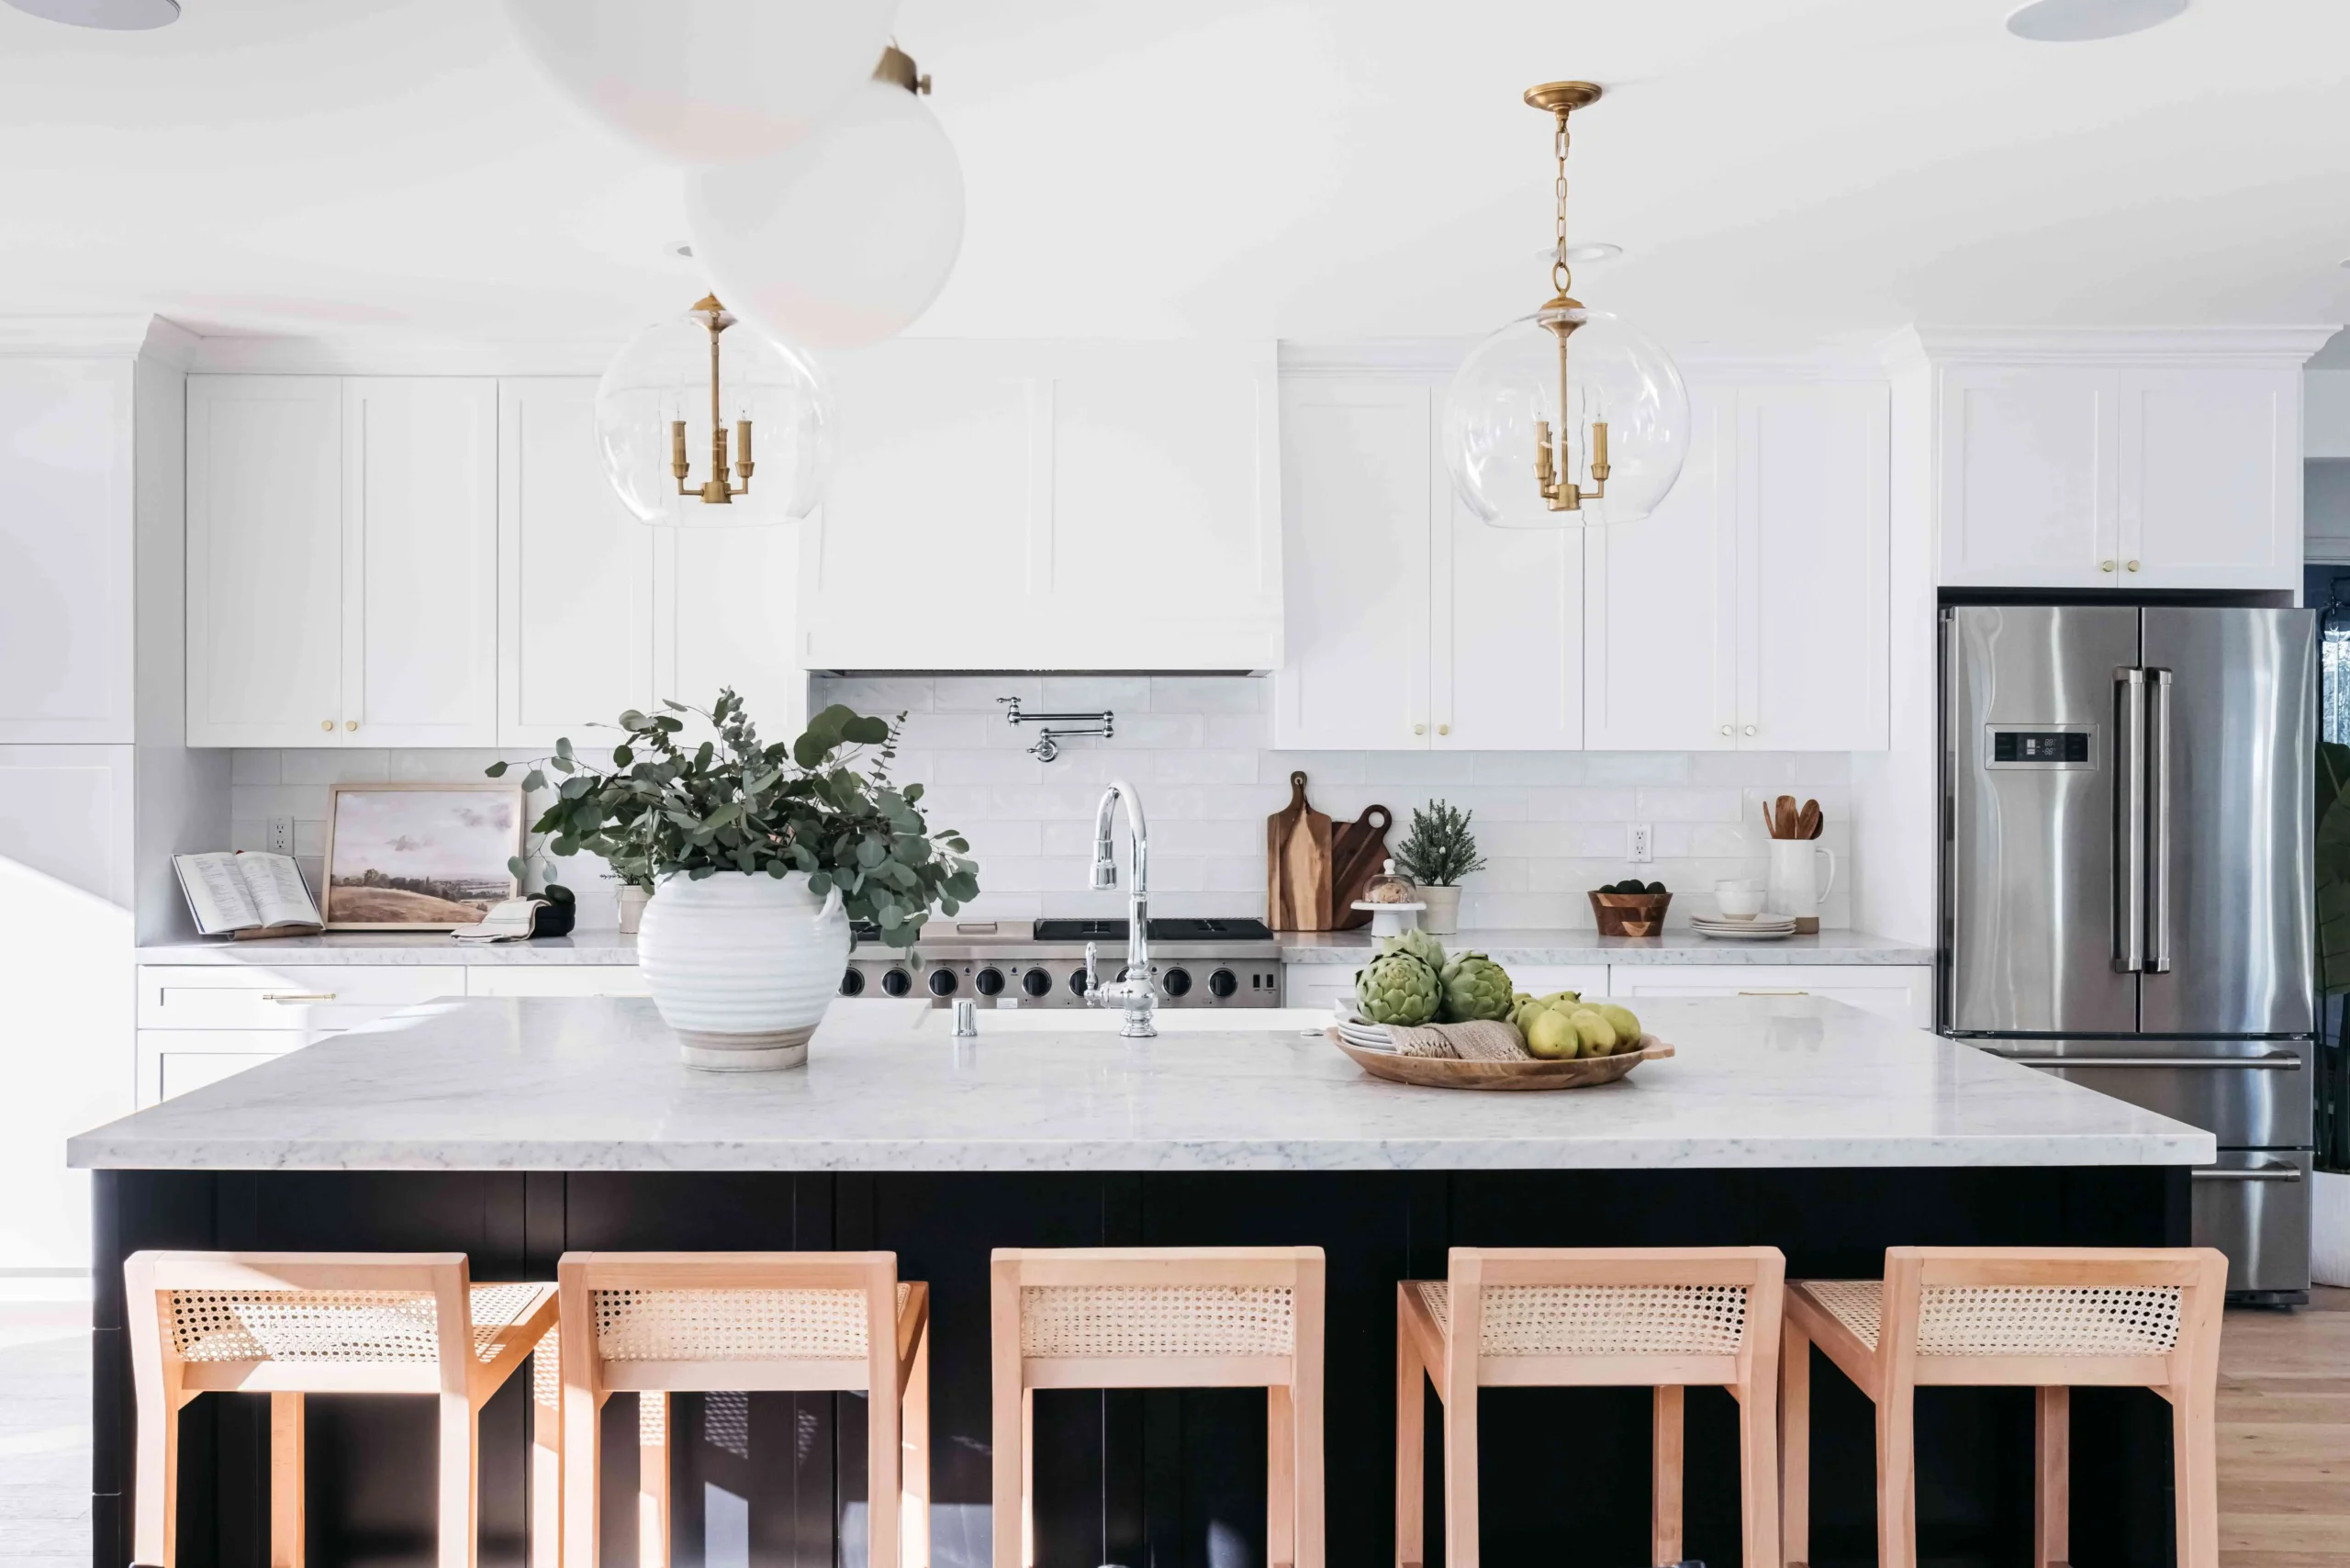 If there is one style of kitchen cabinets that snugly fits in both the traditional and contemporary renovations, it’s the white shaker cabinets. They have a classic and modest look and give a serene feel to your kitchen.